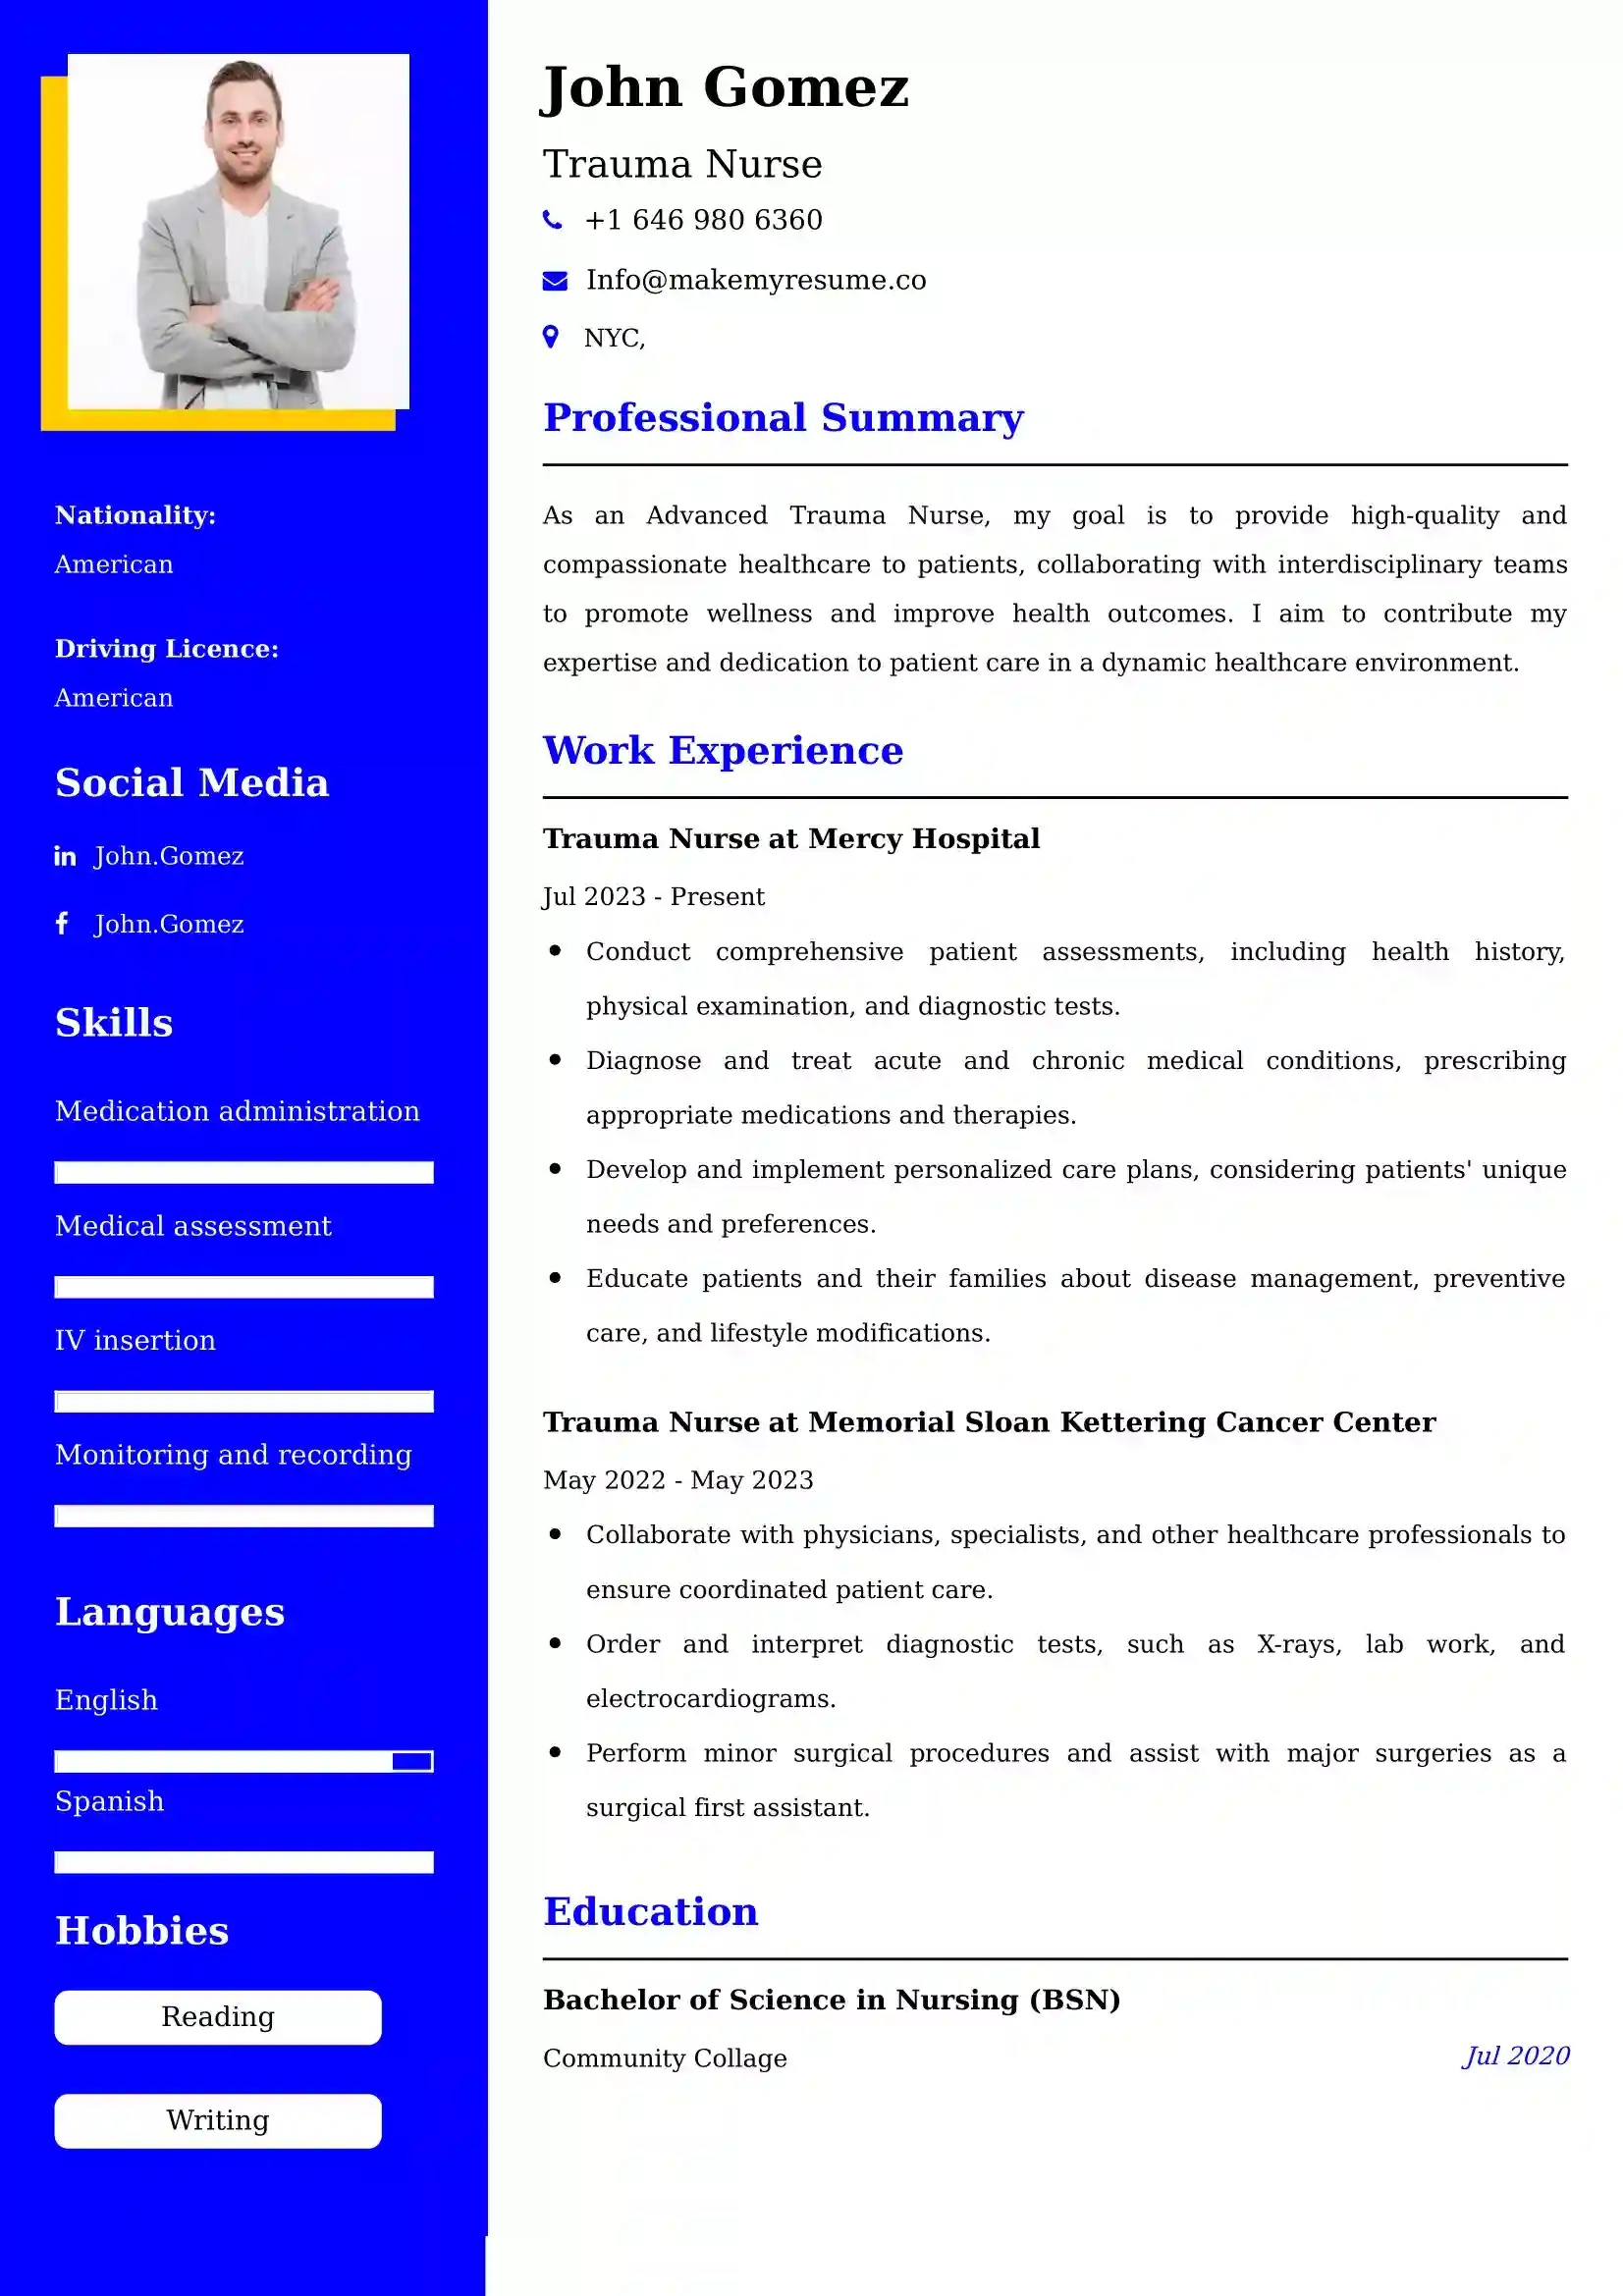 Trauma Nurse Resume Examples for UK Jobs - Tips and Guide